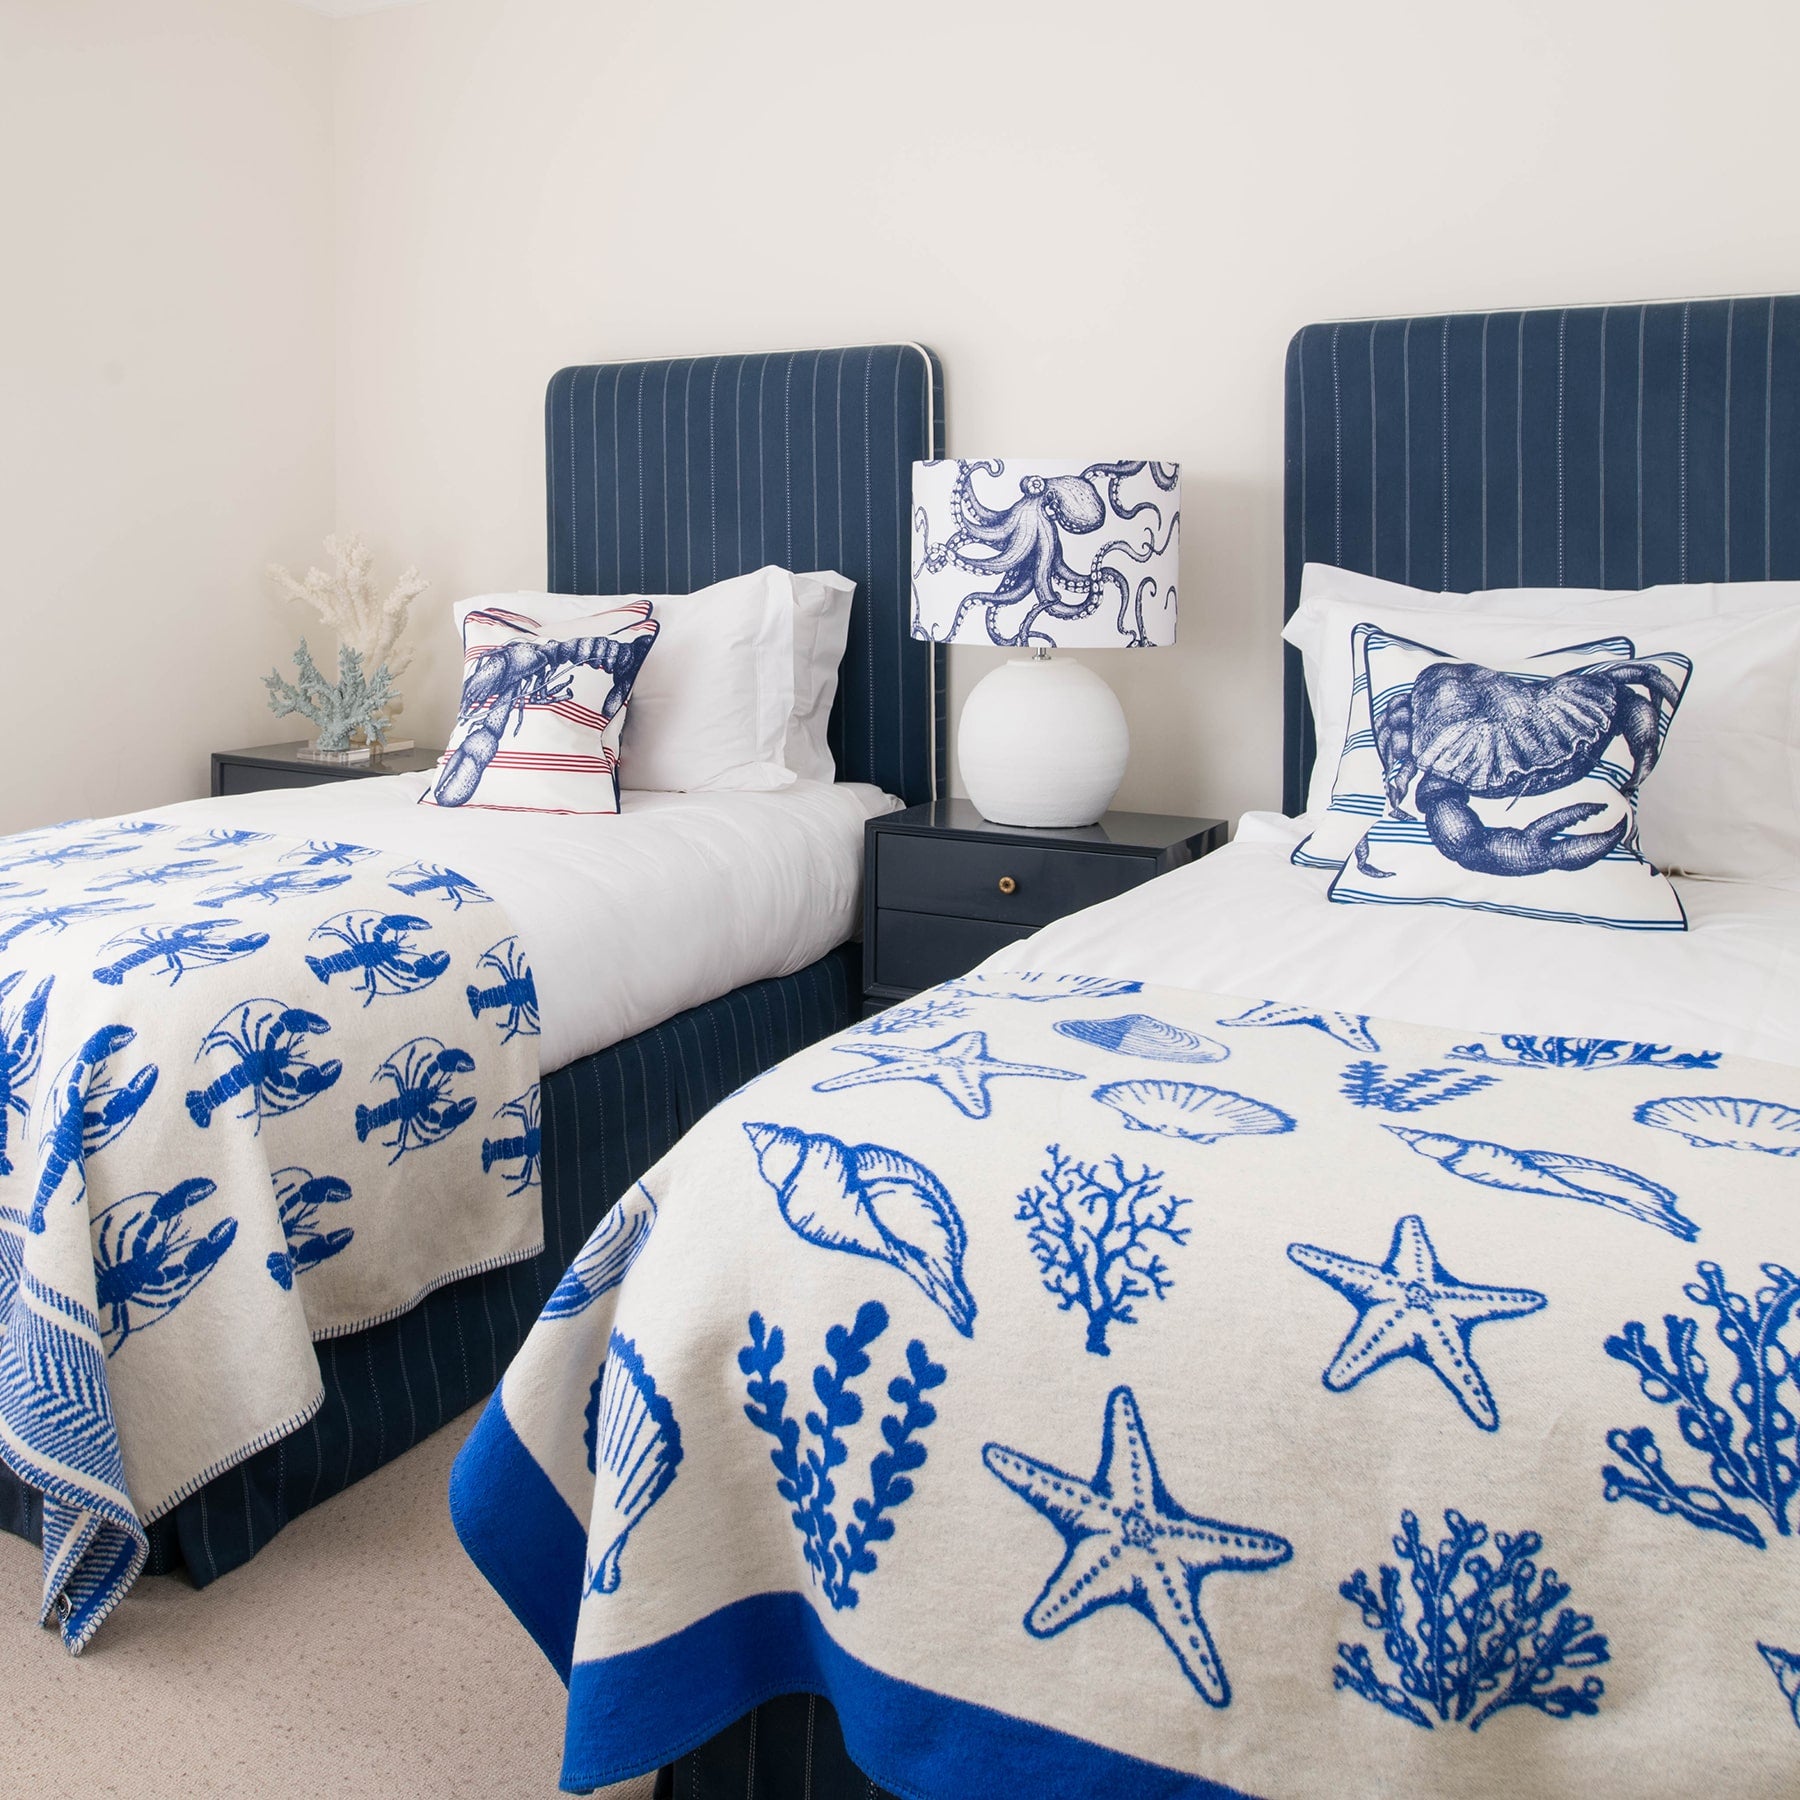 Our Classic Navy Octopus design on a white background on a white lampbase on a side table between two single beds.On the beds are classic Navy and White cushions and our reversible throws are draped over the ends of the beds.